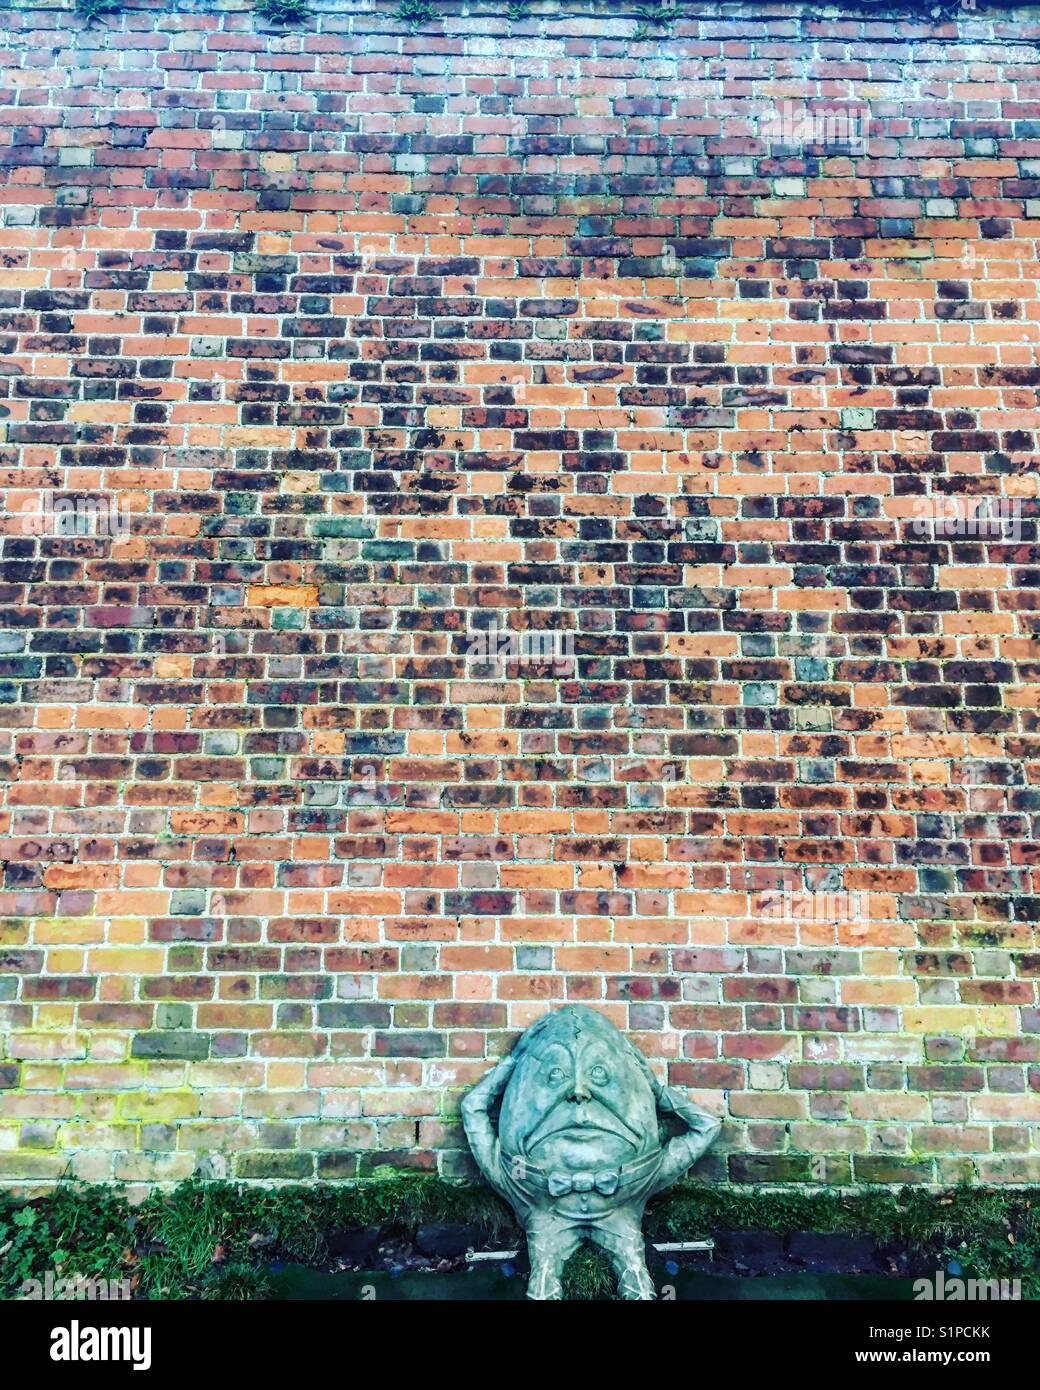 Humpty Dumpty sculpture in front of a colourful brick wall Stock Photo